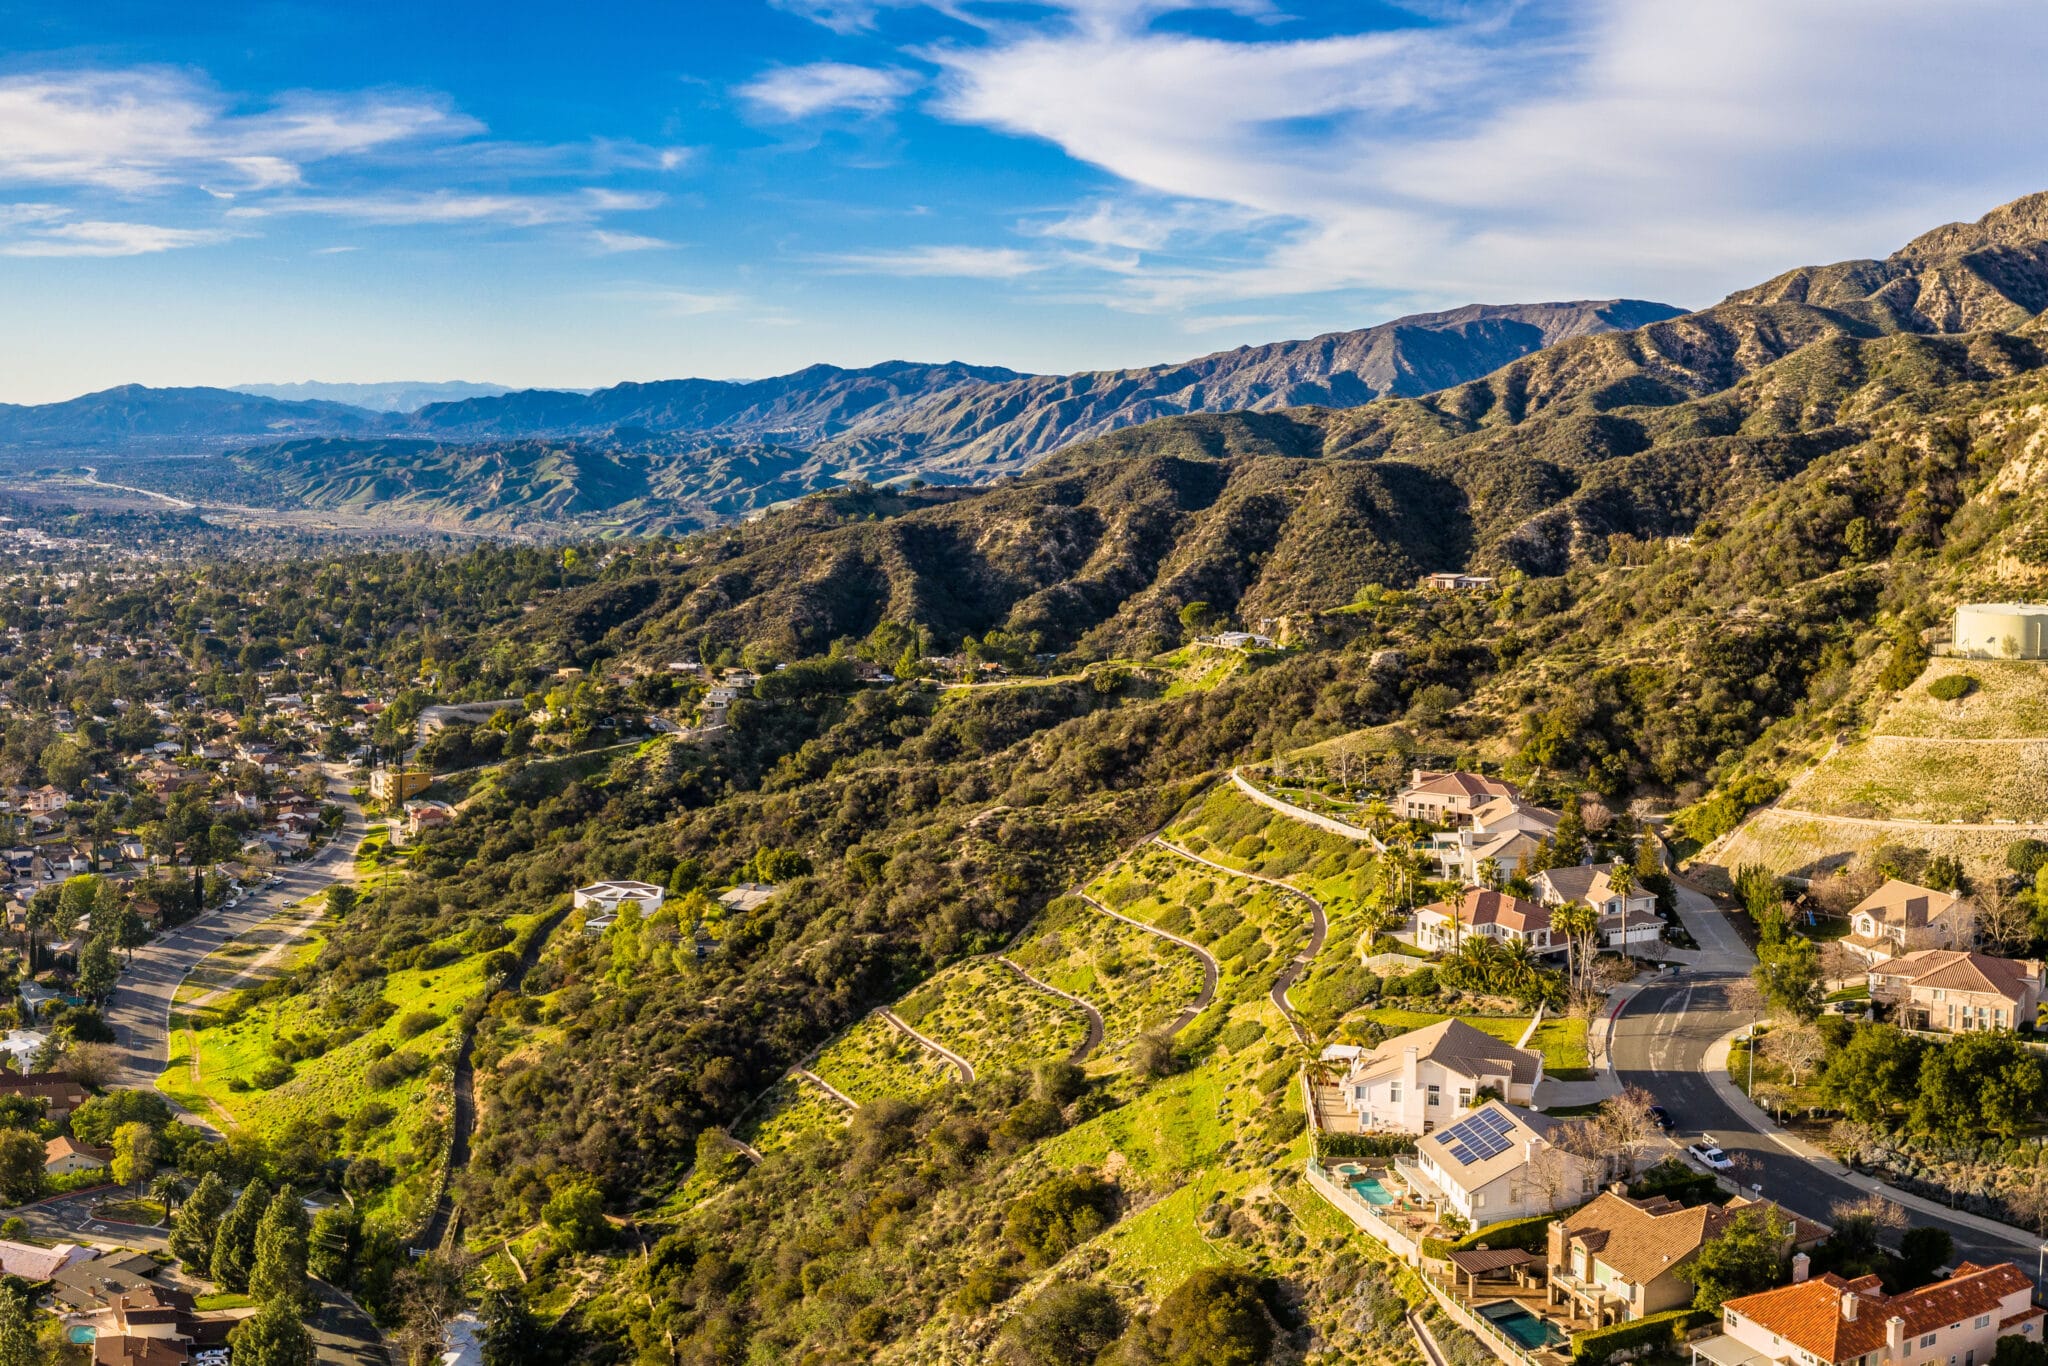 What Makes San Gabriel Valley So Special